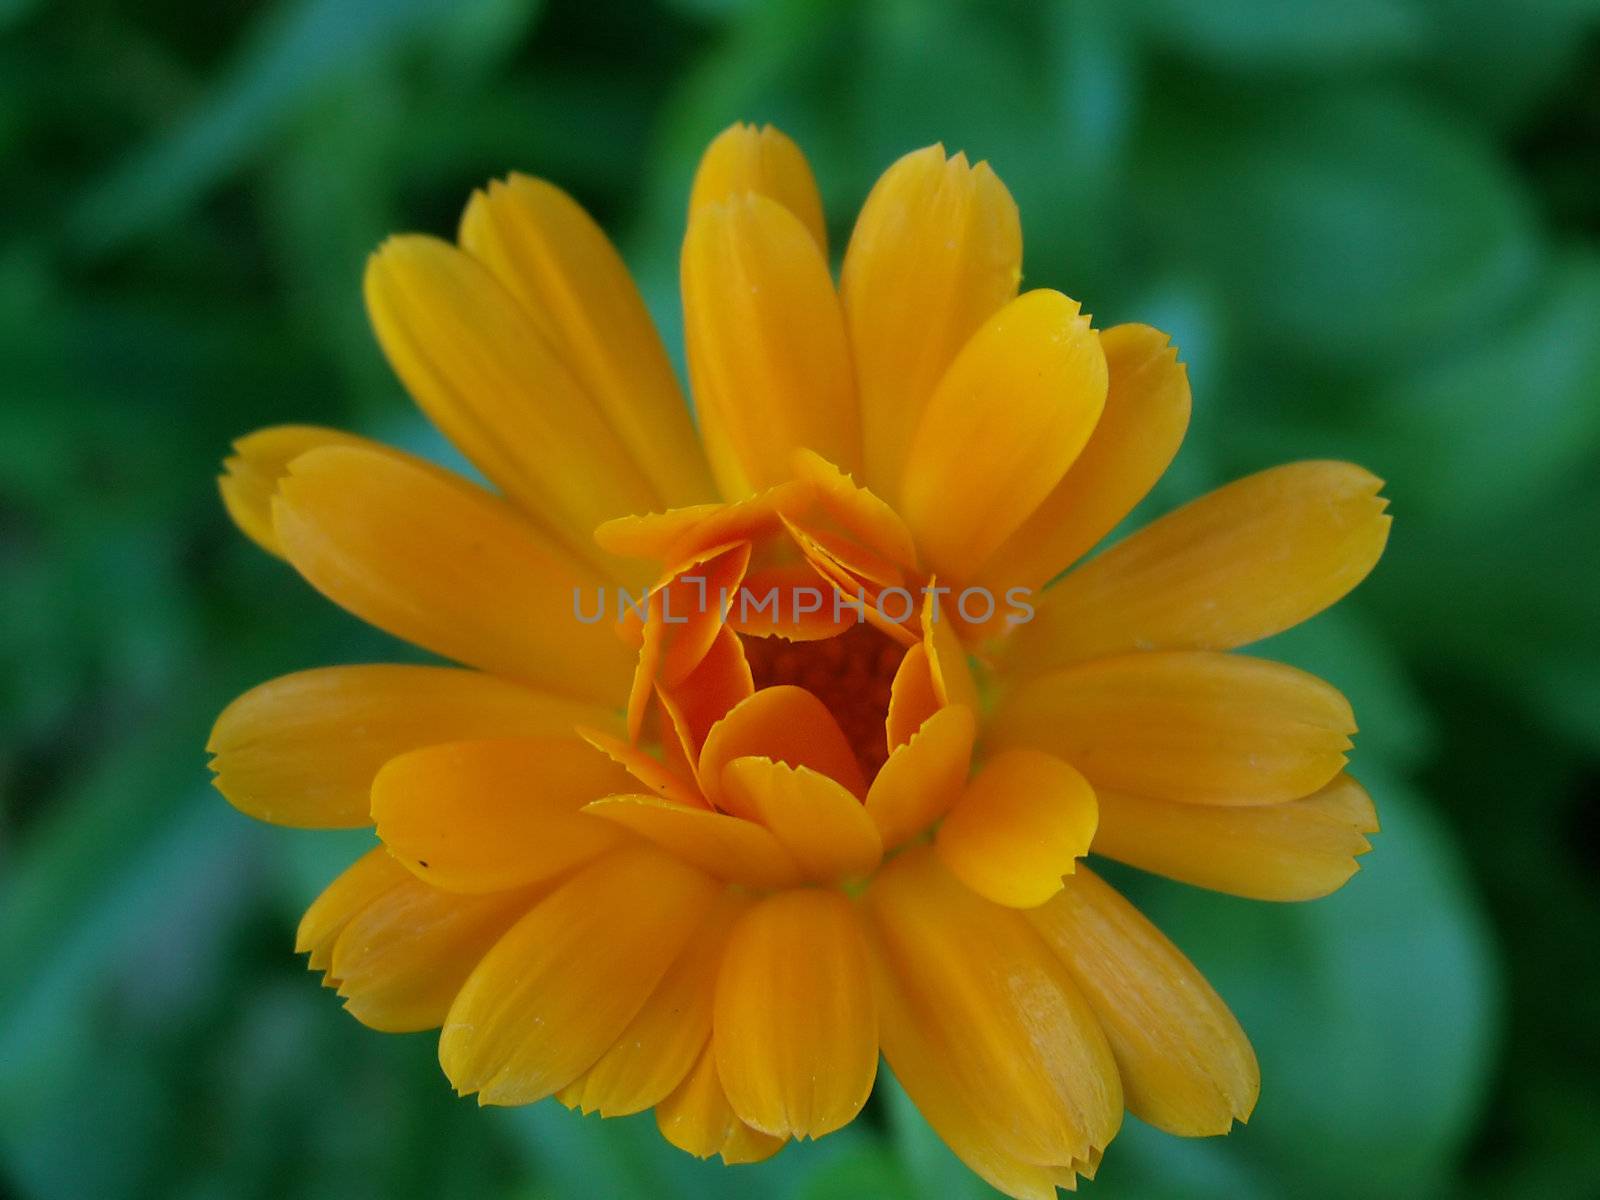 detail of a marigold